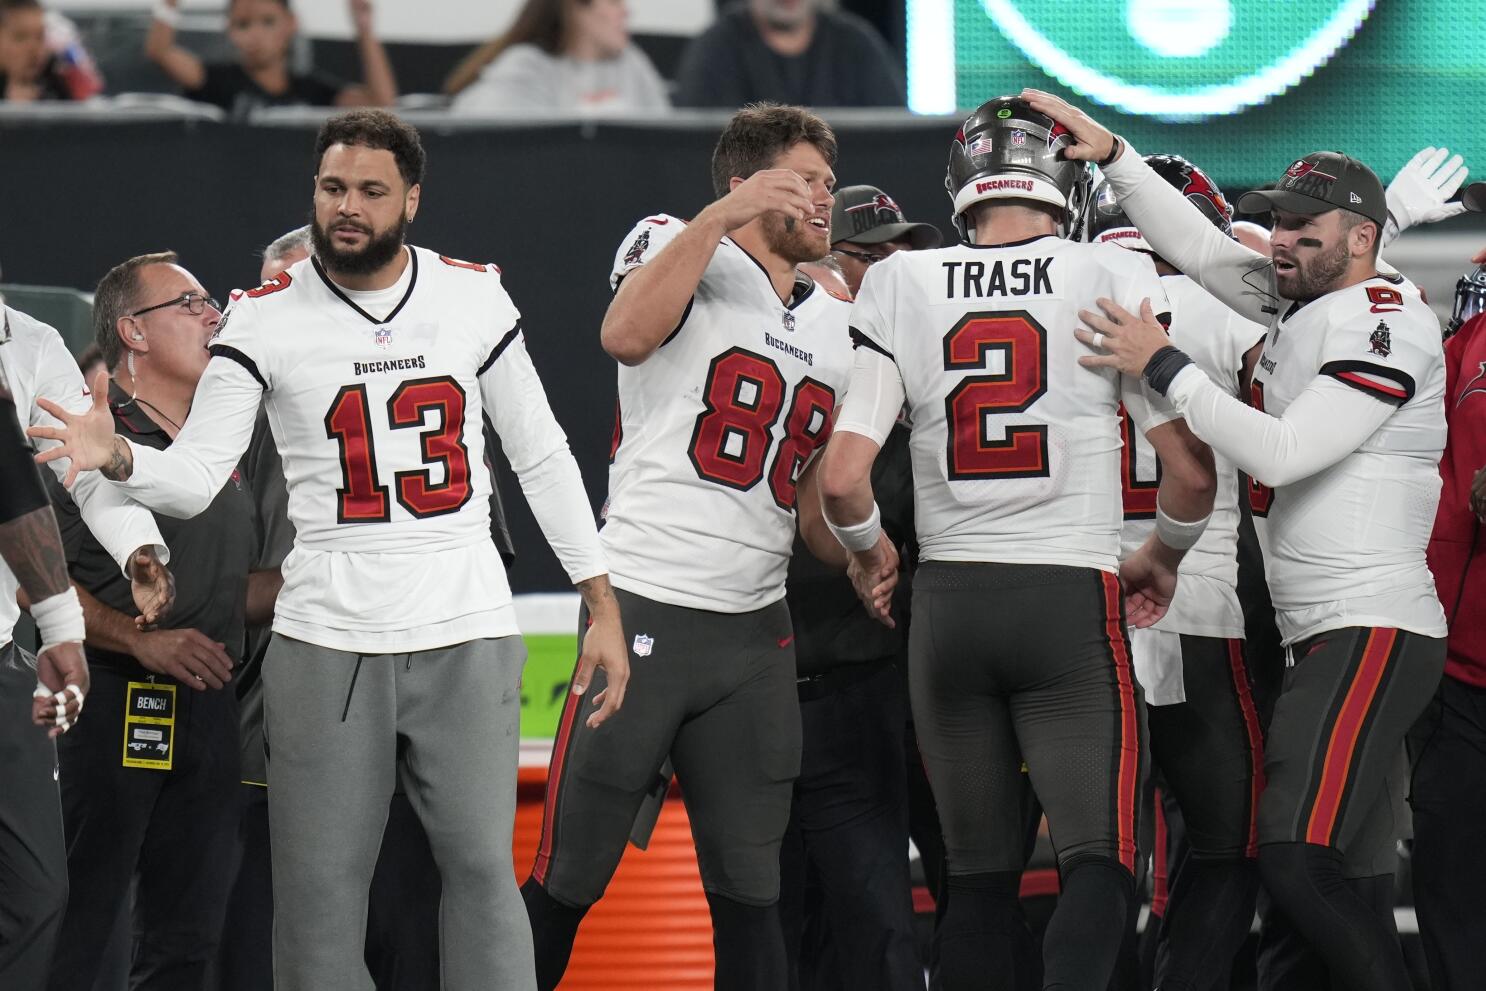 Mayfield sits while Trask plays in Bucs' 13-6 preseason win over Jets.  Backup Wolford injures neck - The San Diego Union-Tribune